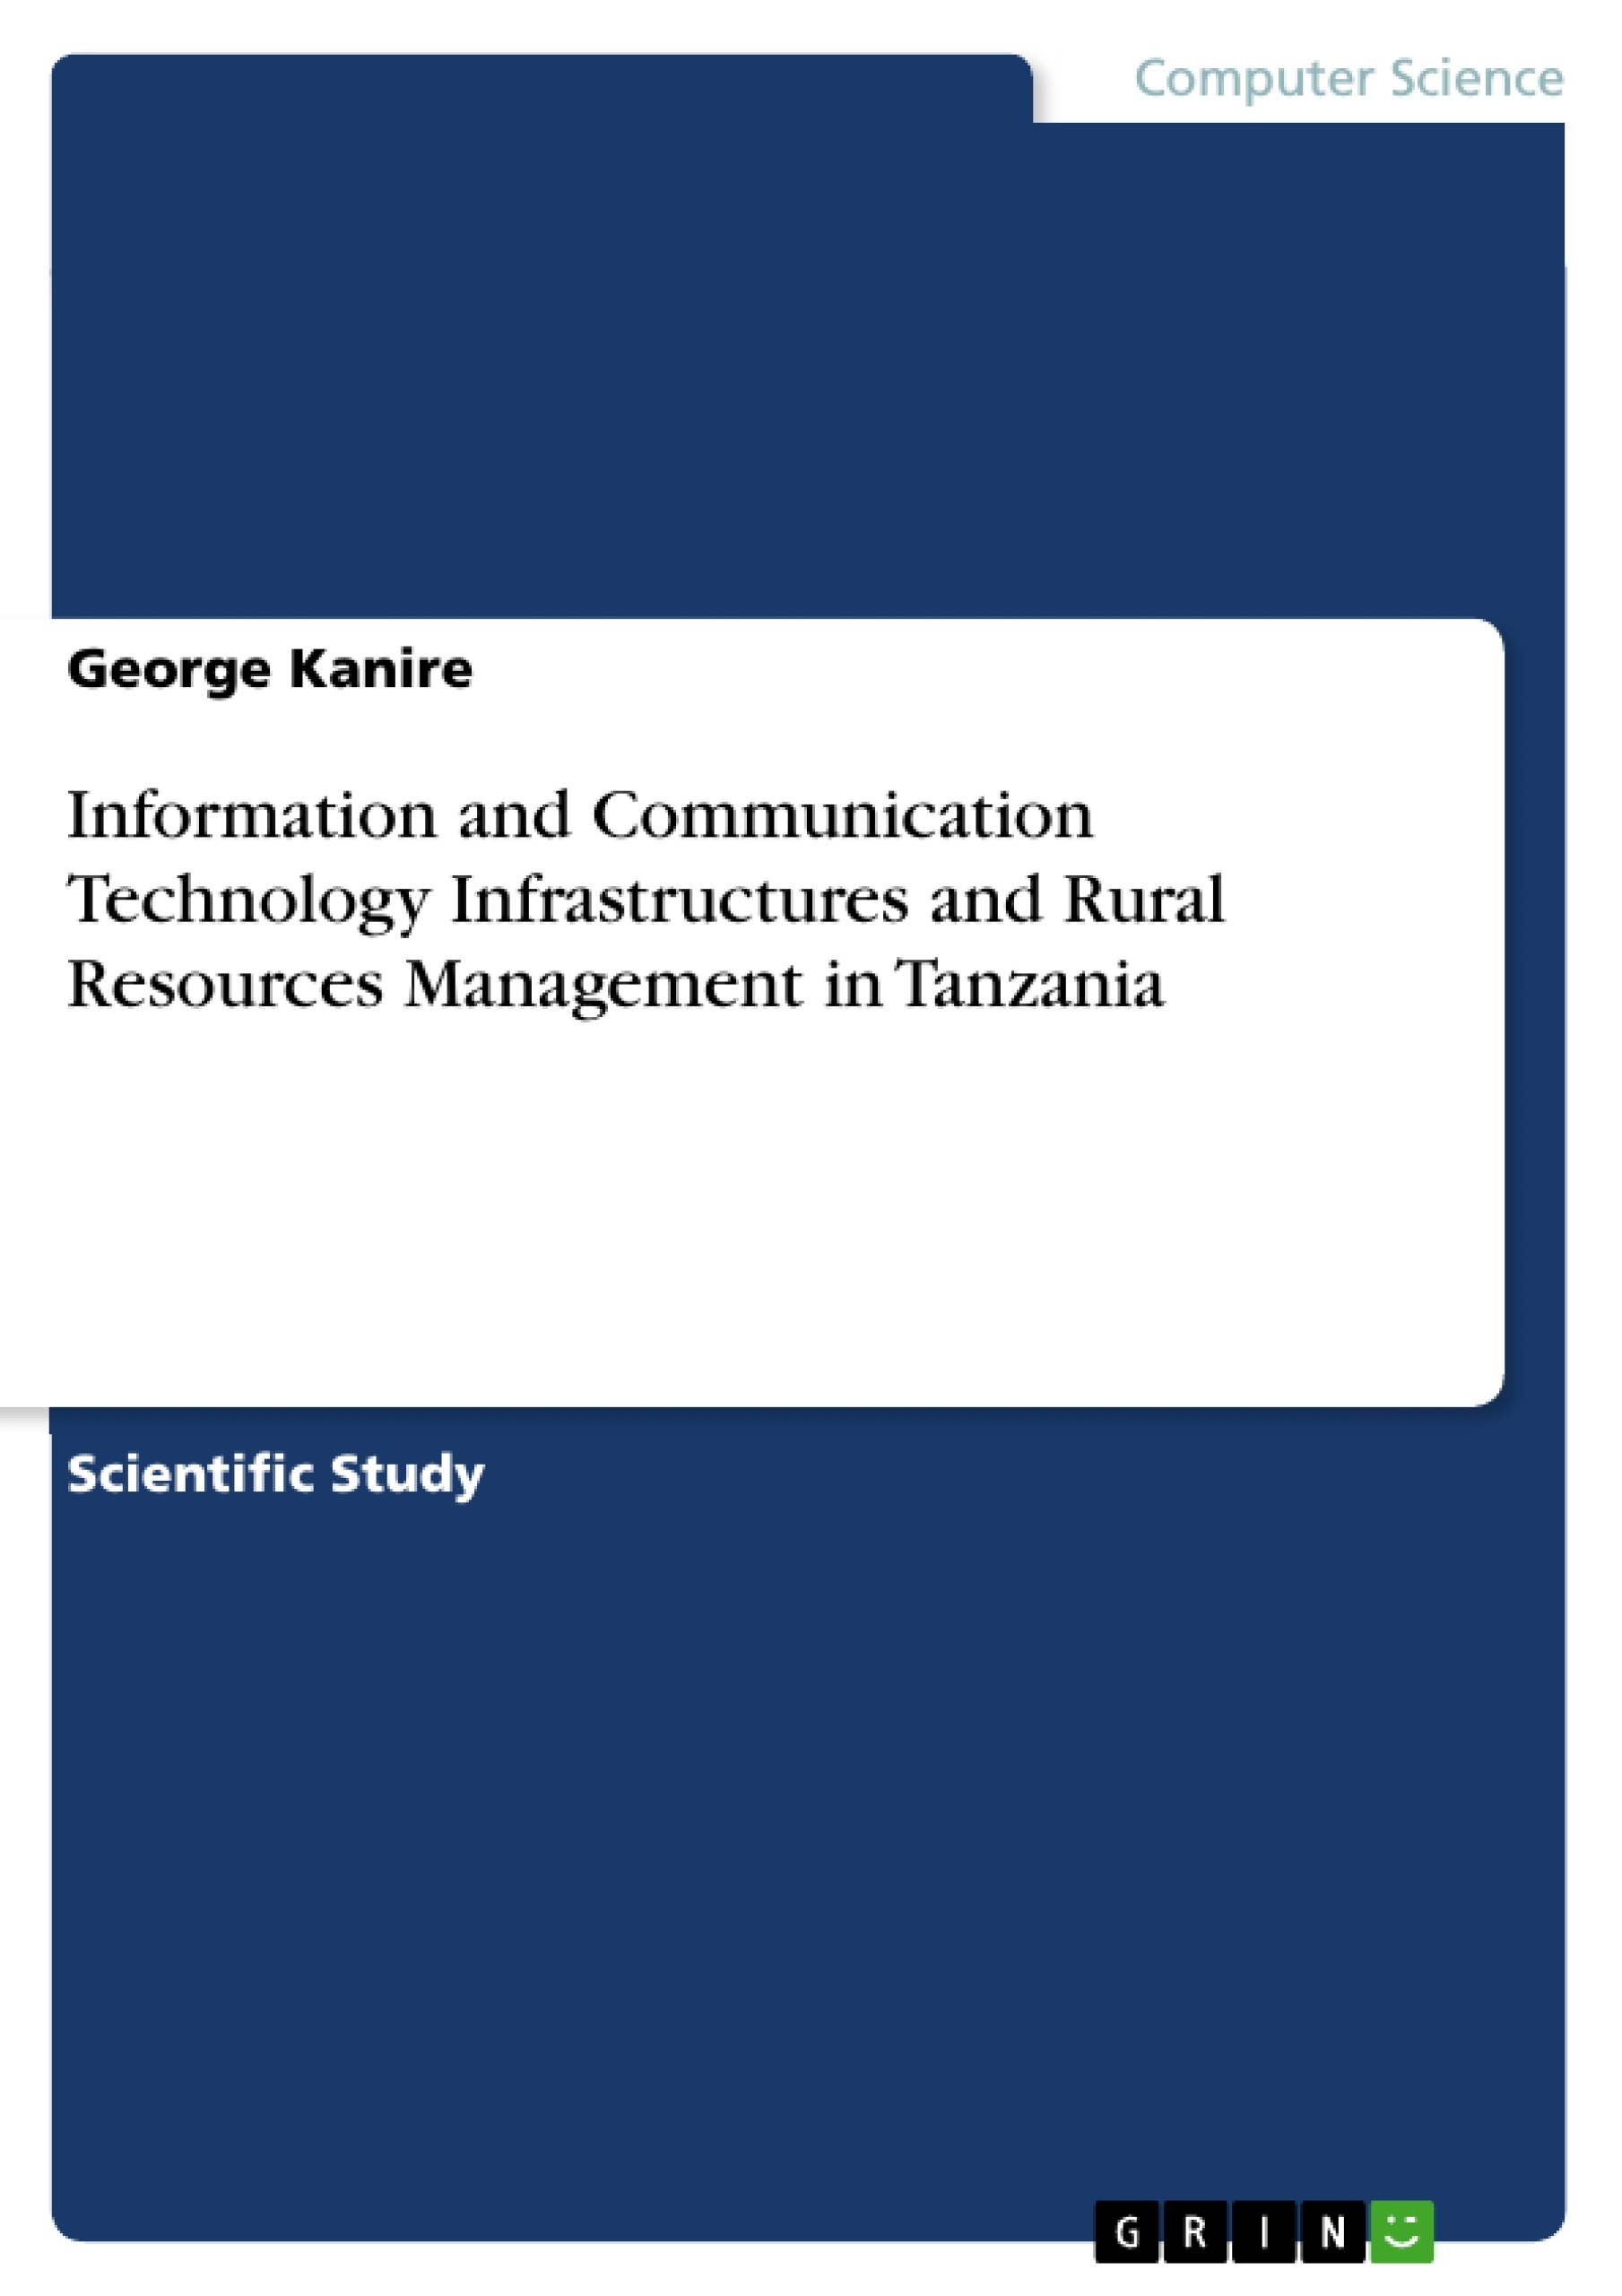 Título: Information and Communication Technology Infrastructures and Rural Resources Management in Tanzania